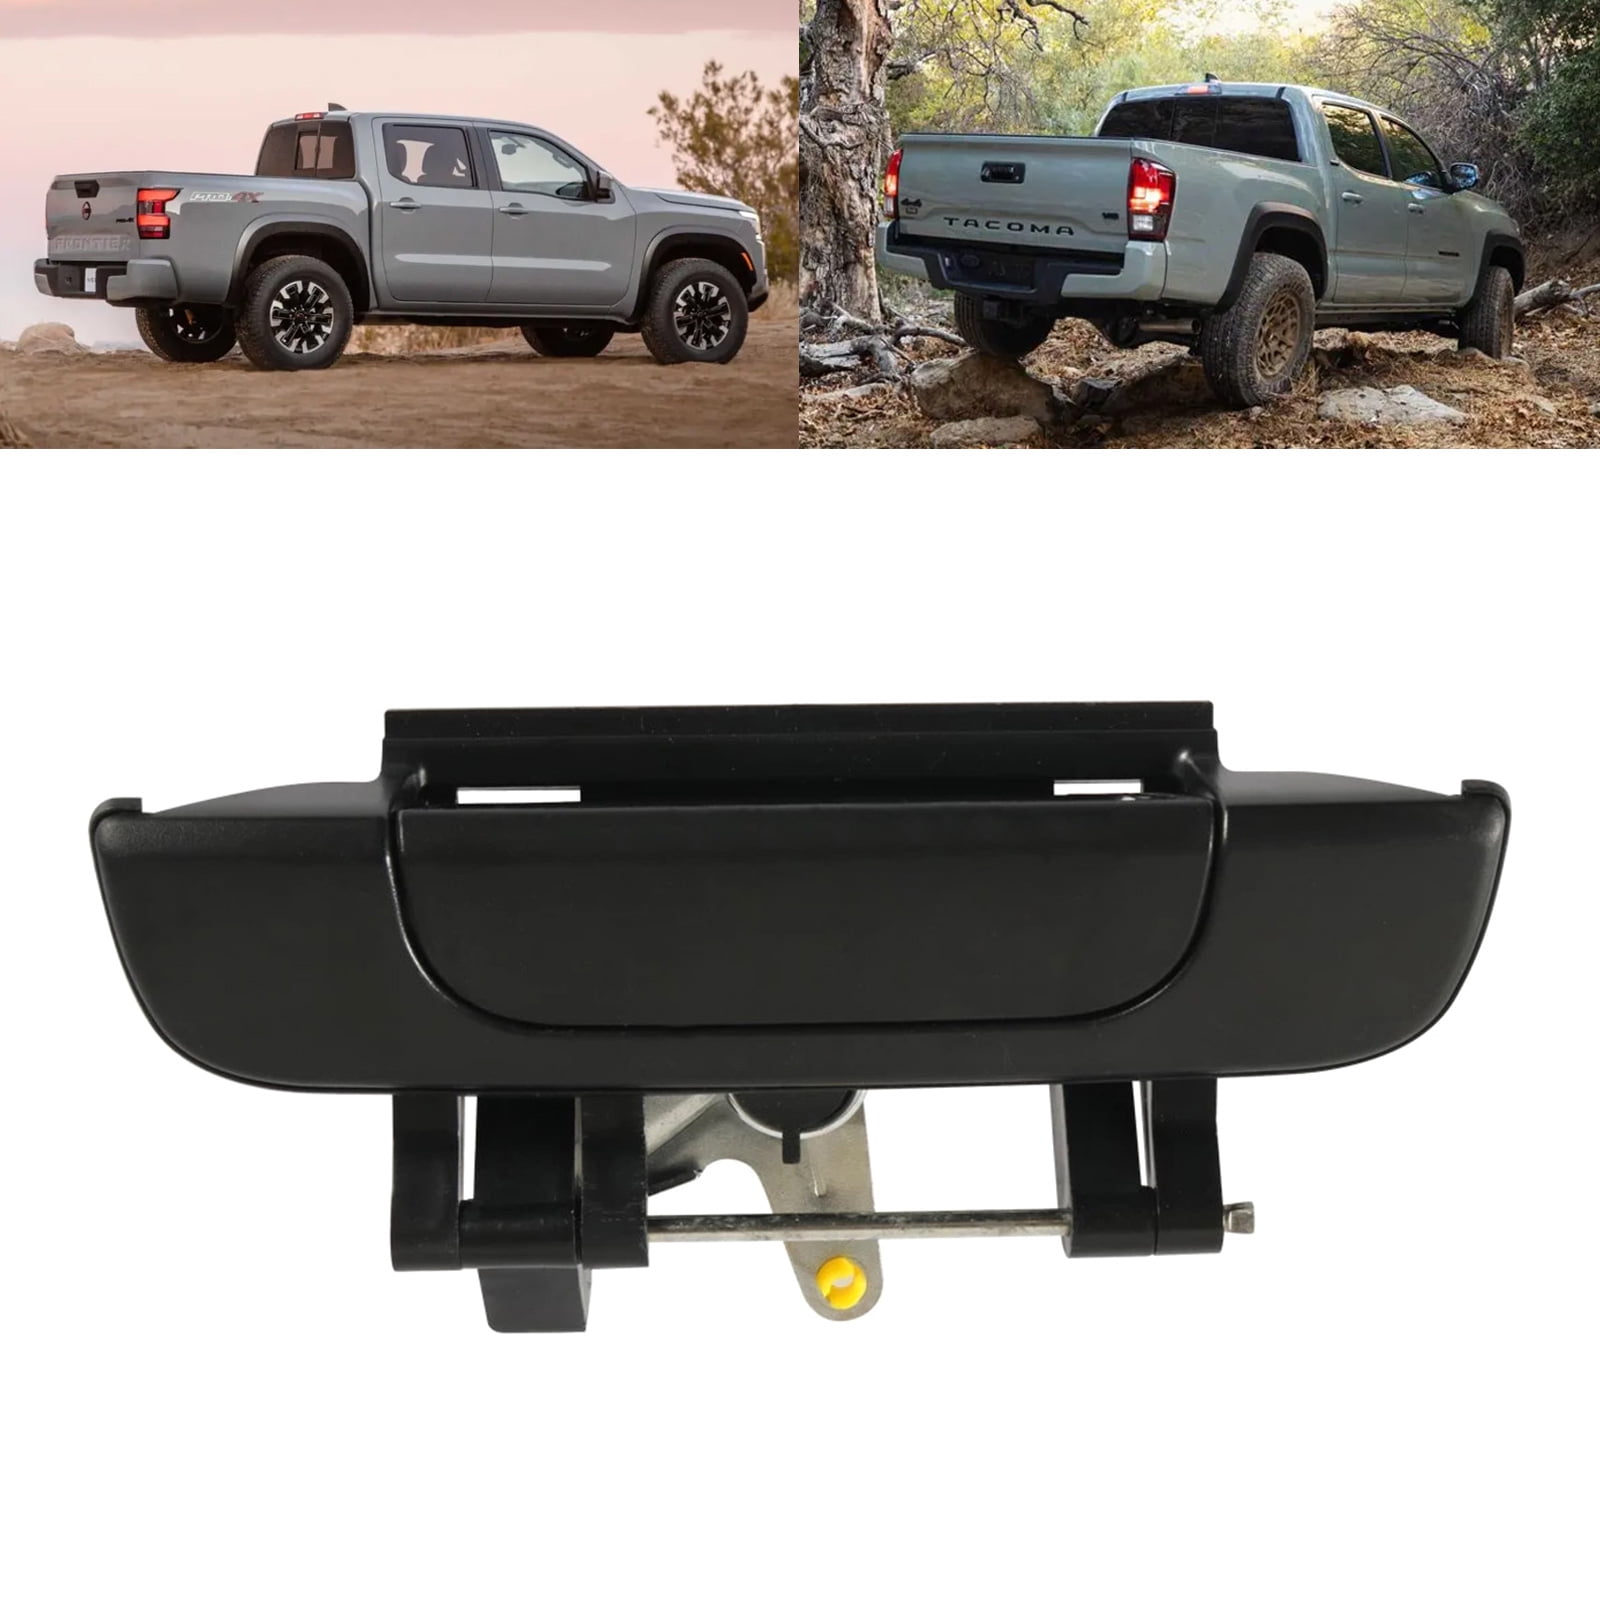 OOKWE Durable Car Rear Tailgate Handle 69090-35010 Compatible For Tacoma  1995-2004 Modification Accessories Handle Replacement